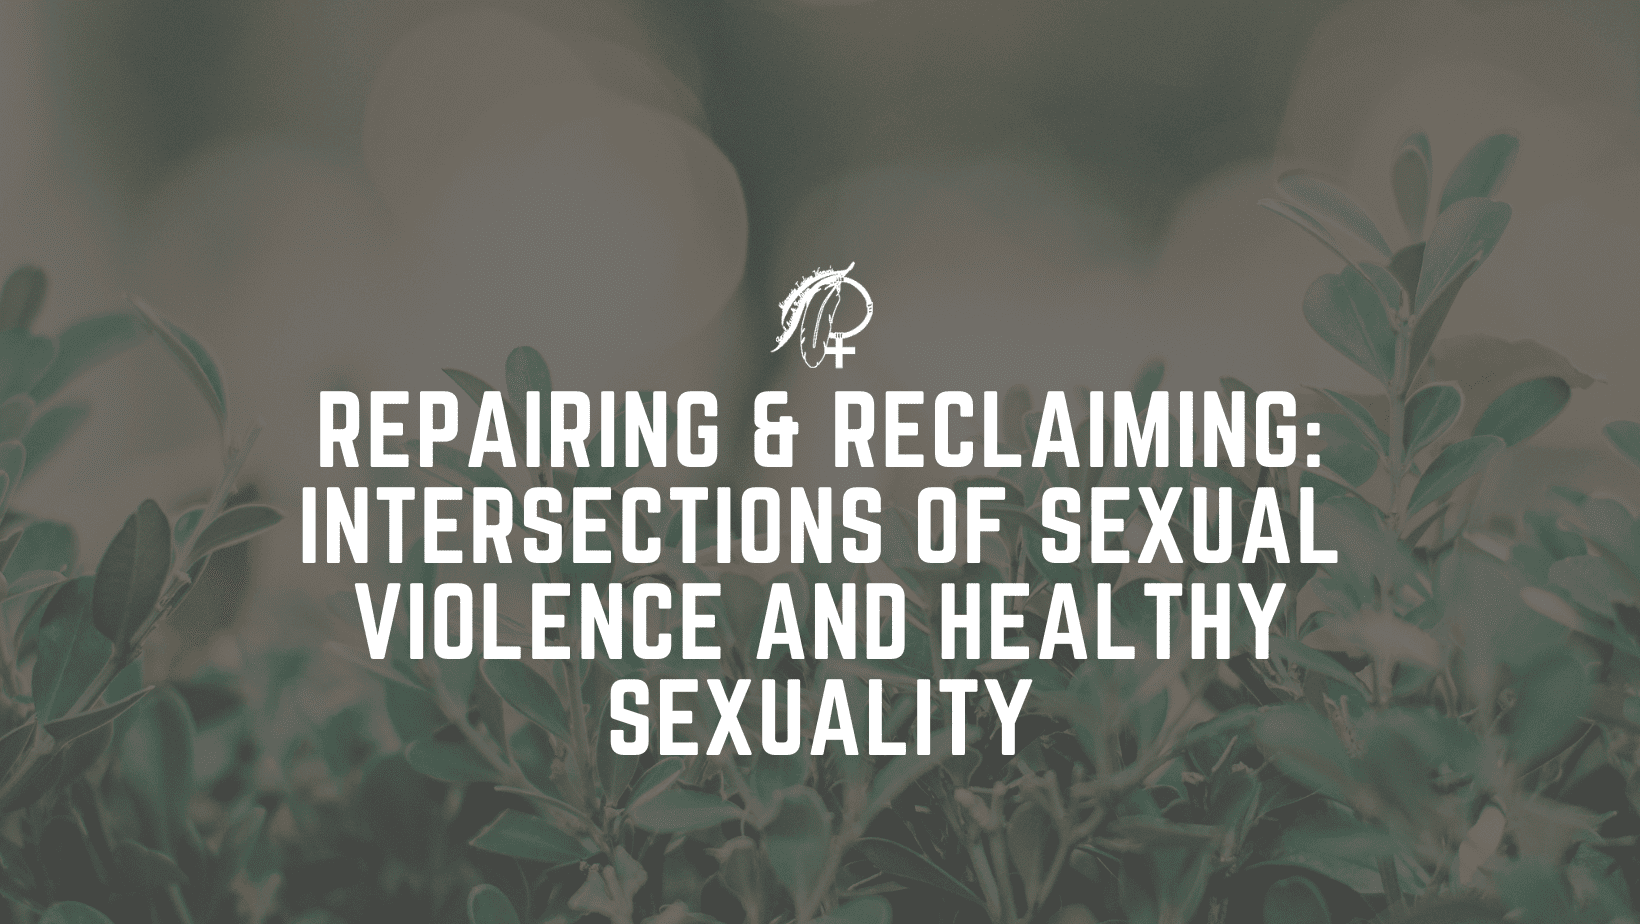 Repairing & Reclaiming Intersections of Sexual Violence and Healthy Sexuality (1)